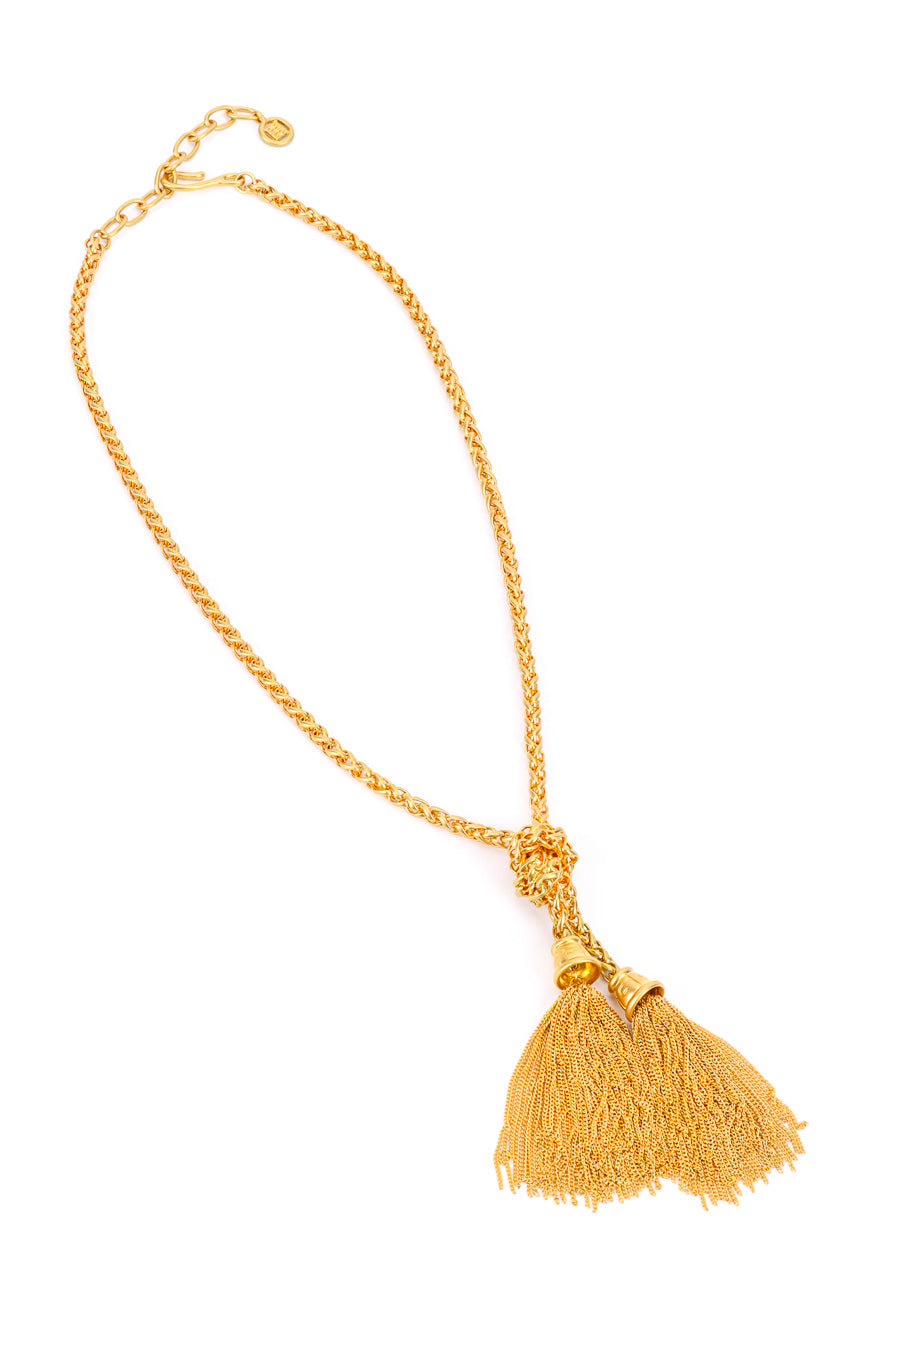 Vintage Givenchy Knotted Double Tassel Necklace front view @recessla